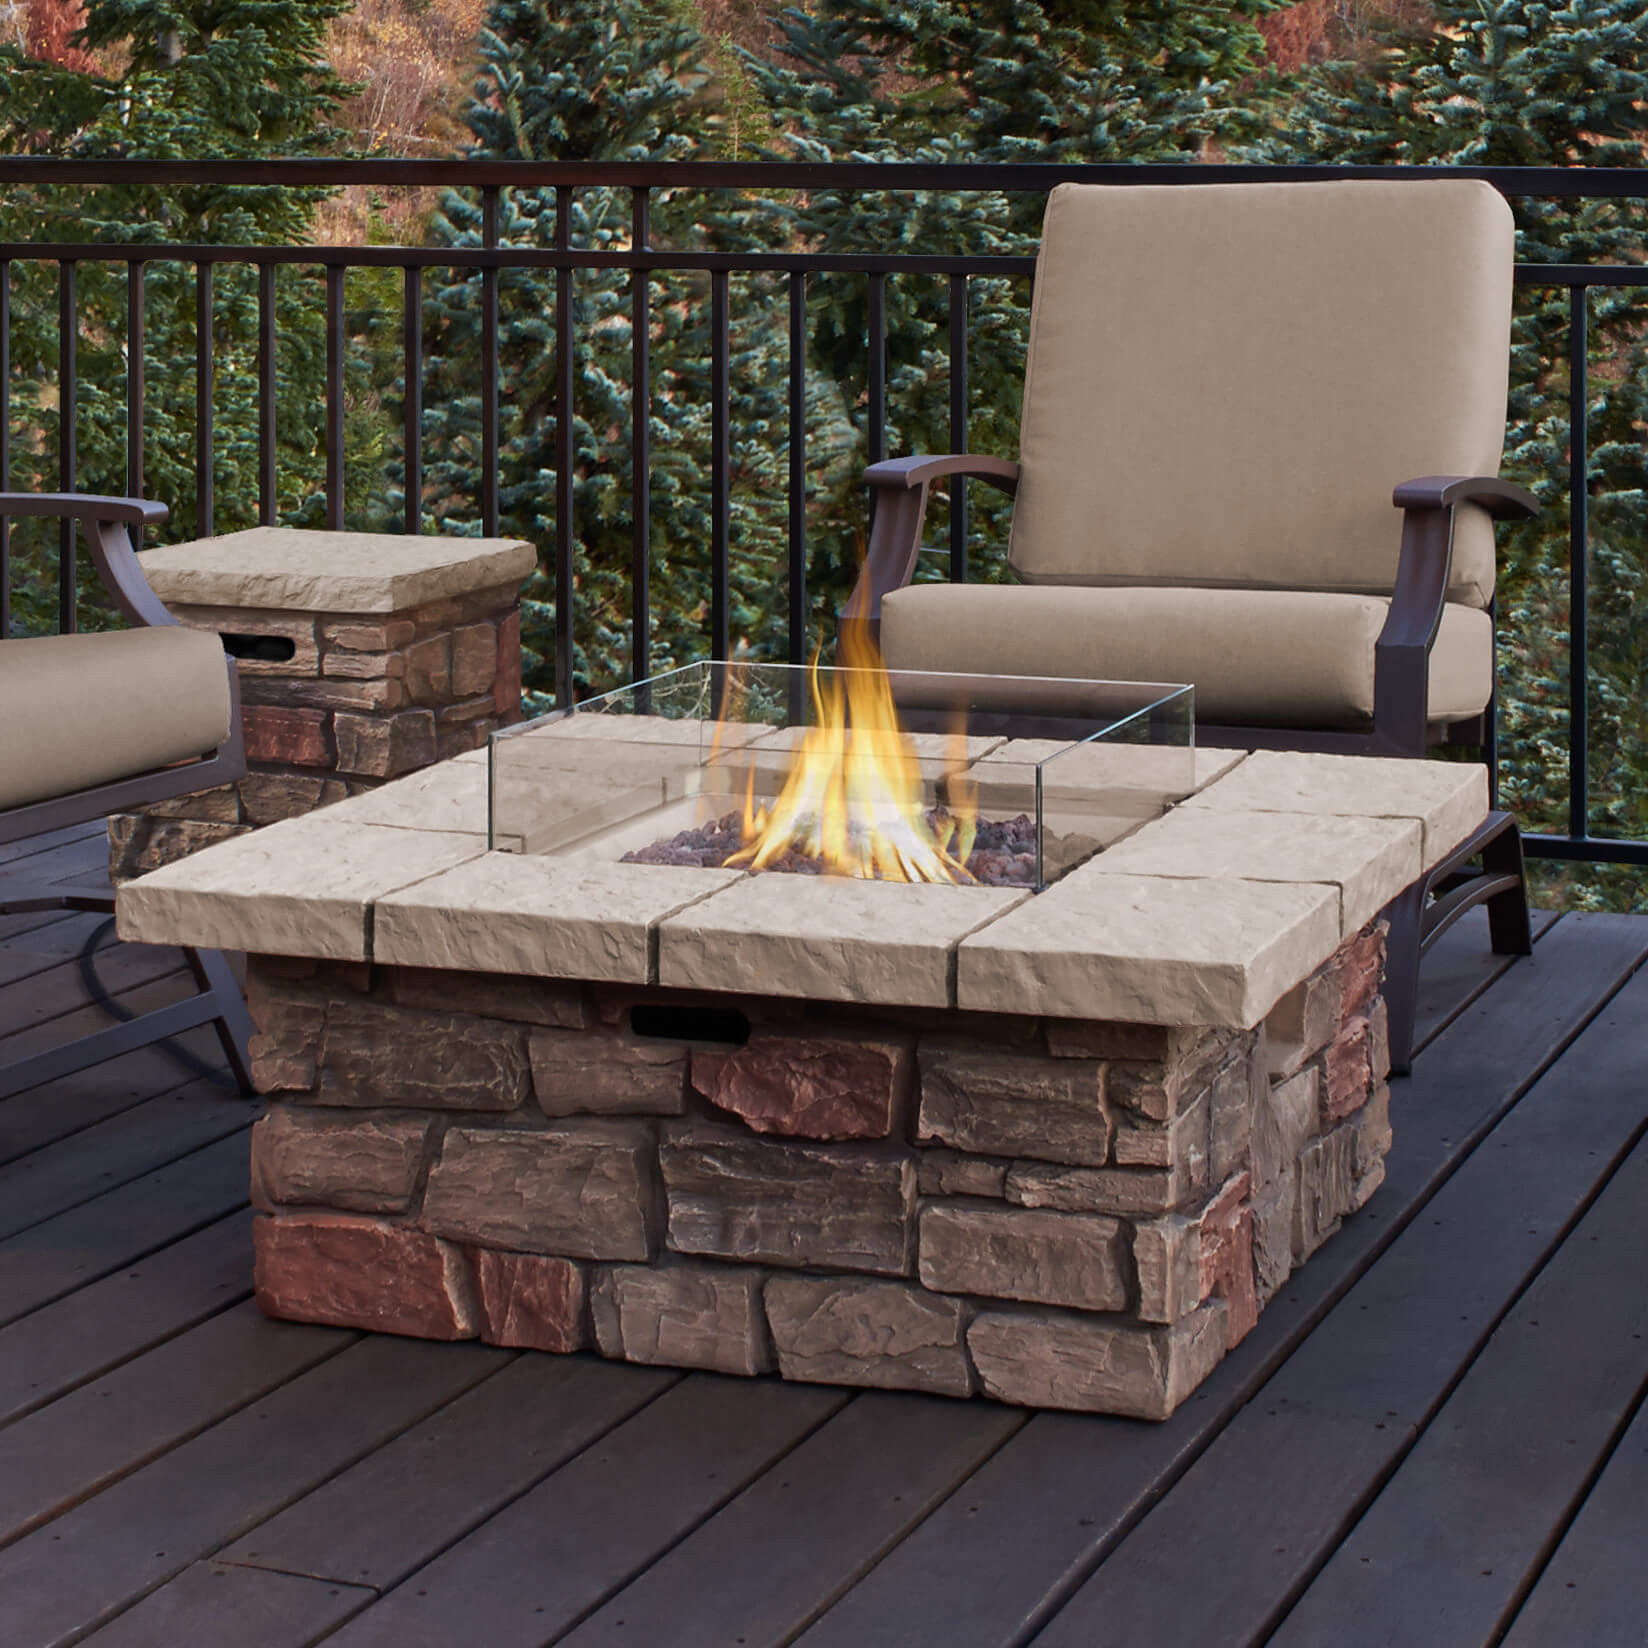 Patio Fire Pit Propane
 Top 15 Types of Propane Patio Fire Pits with Table Buying